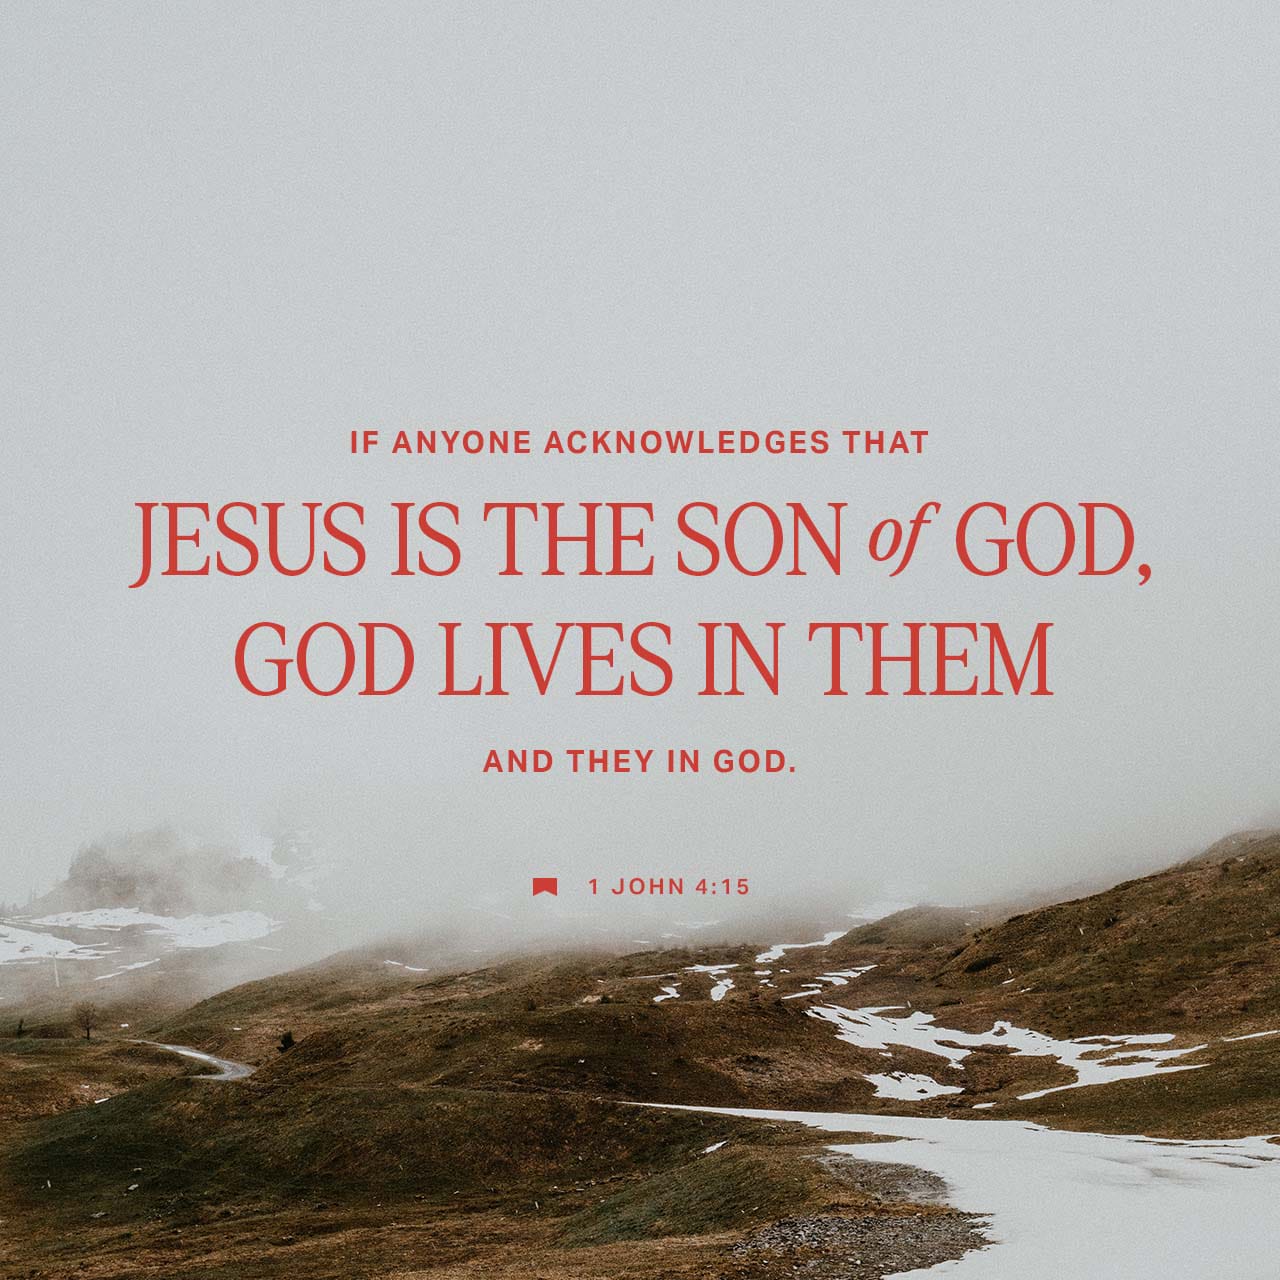 I John 4:15 Whoever confesses that Jesus is the Son of God, God abides in him, and he in God. | New King James Version (NKJV) | Download The Bible App Now